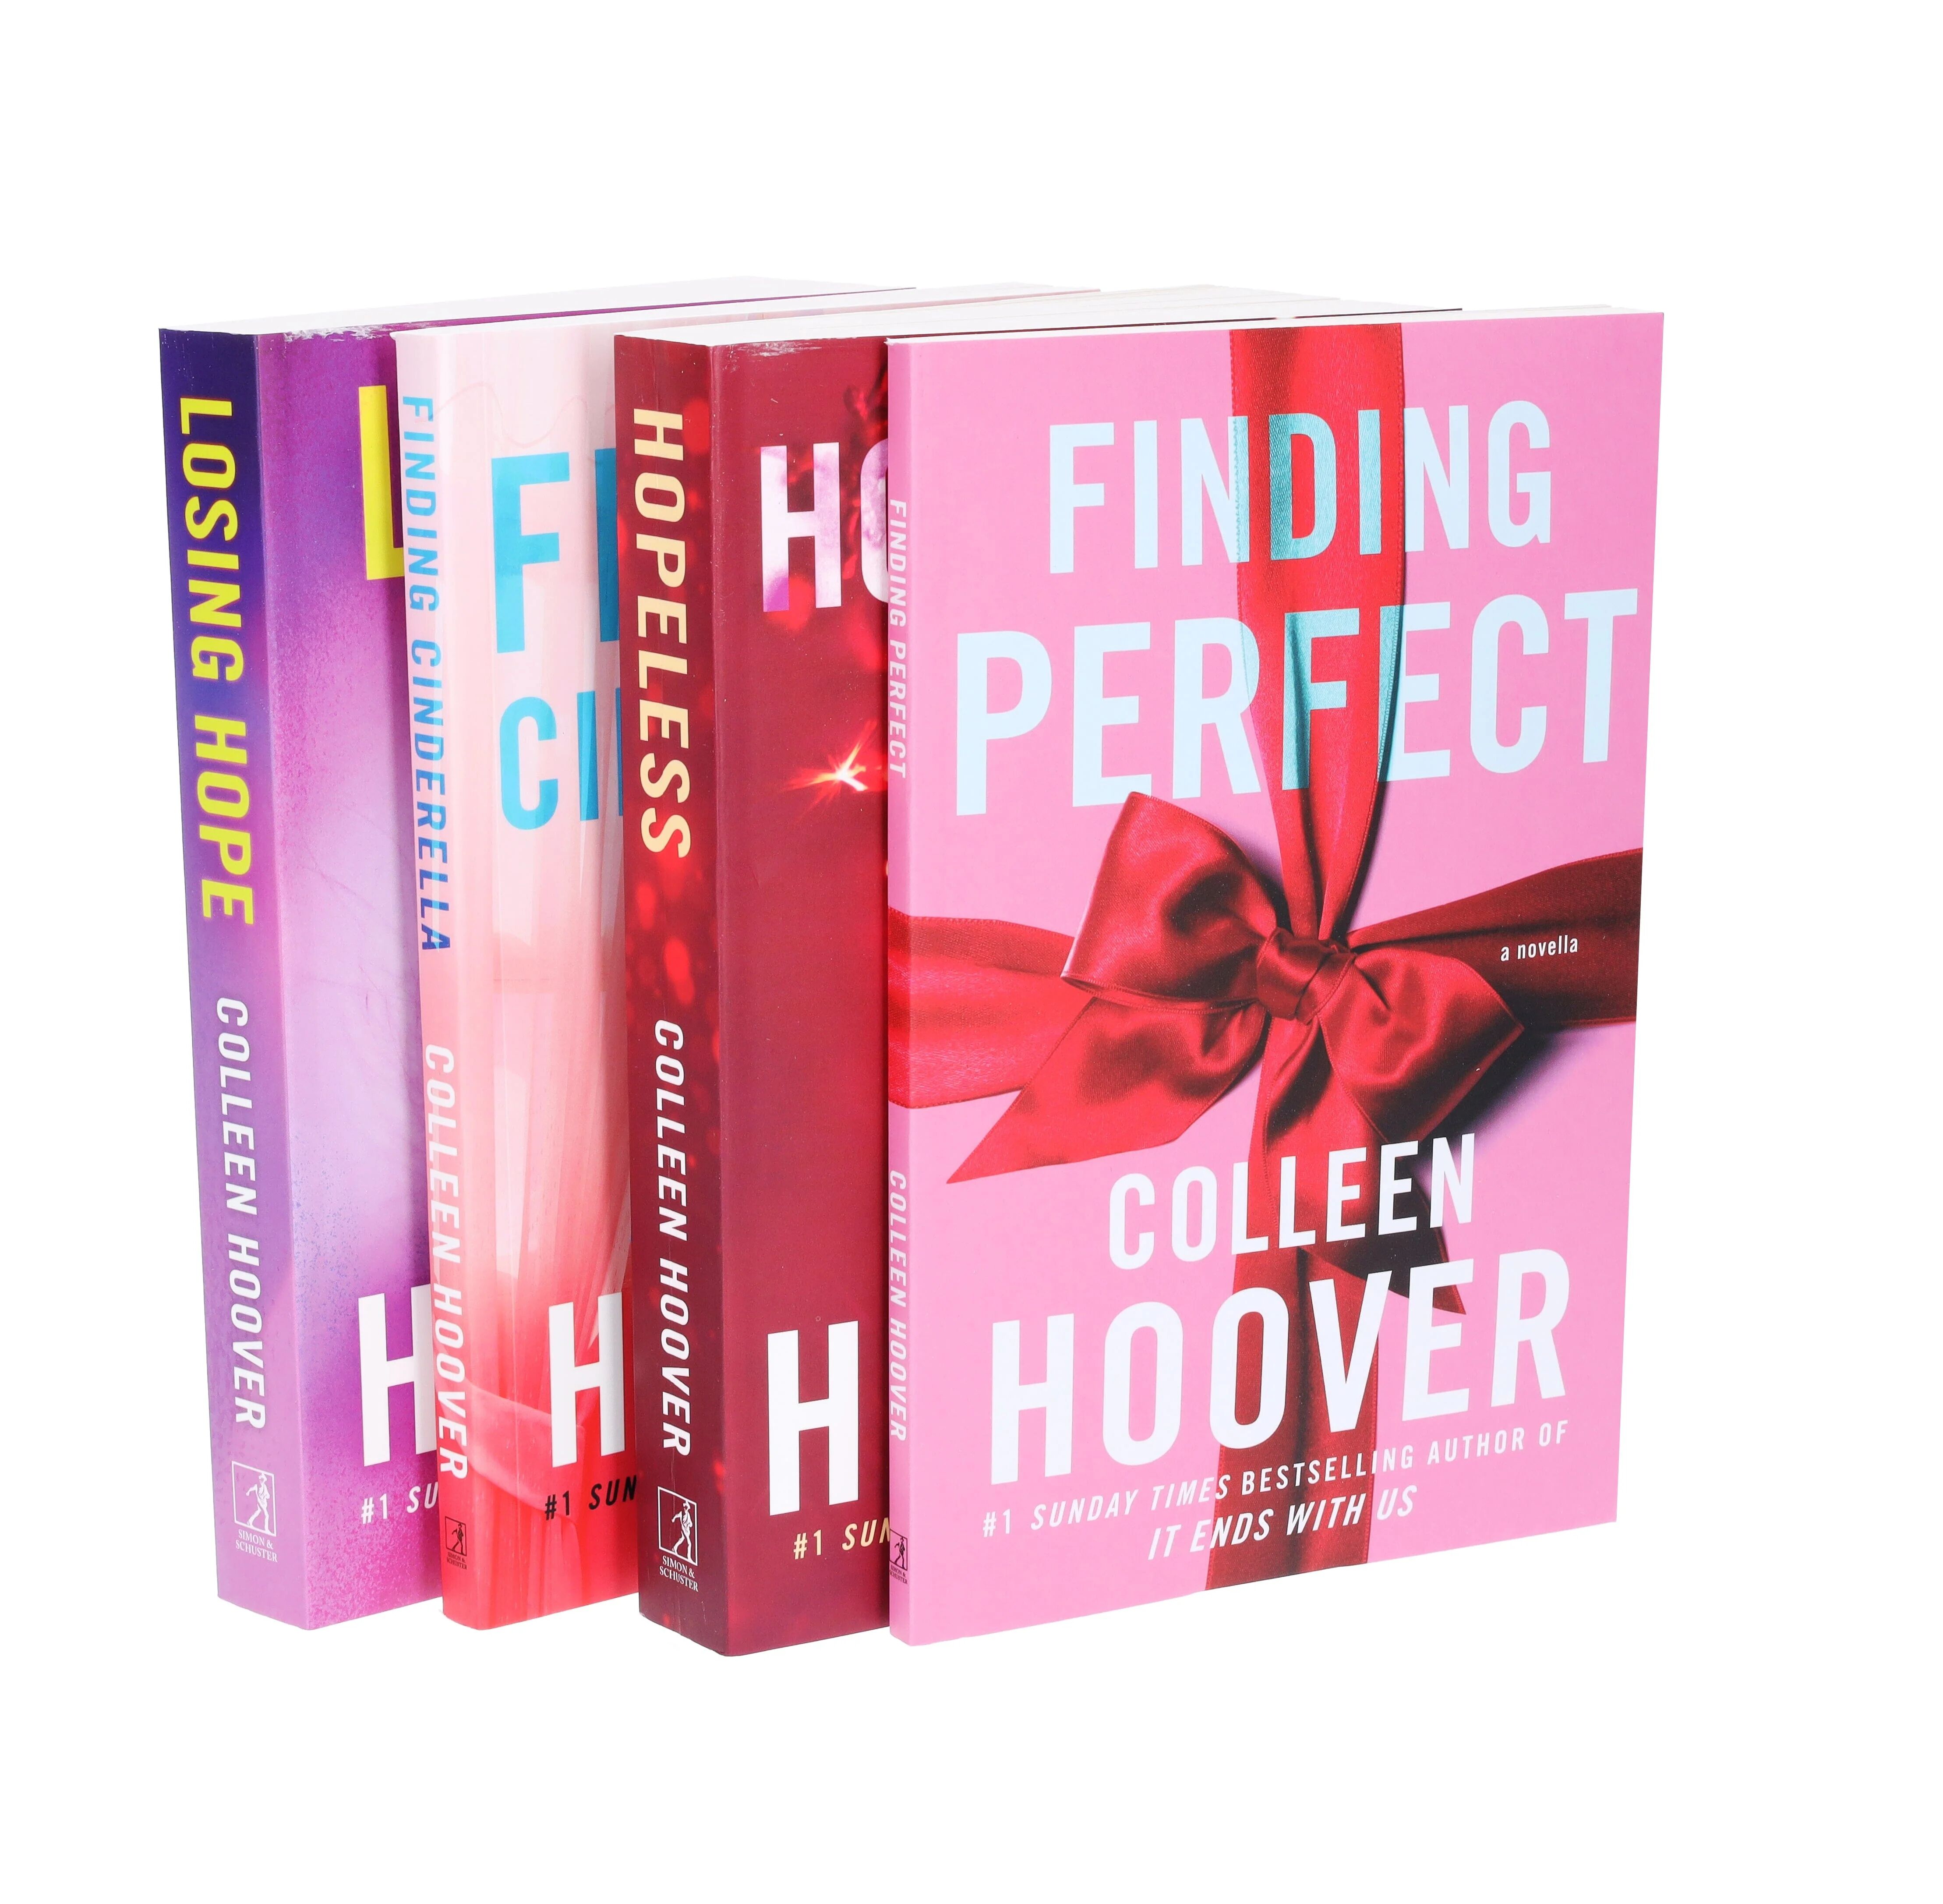 Hopeless Series By Colleen Hoover 4 Books Collection Set - Fiction - Paperback Simon & Schuster